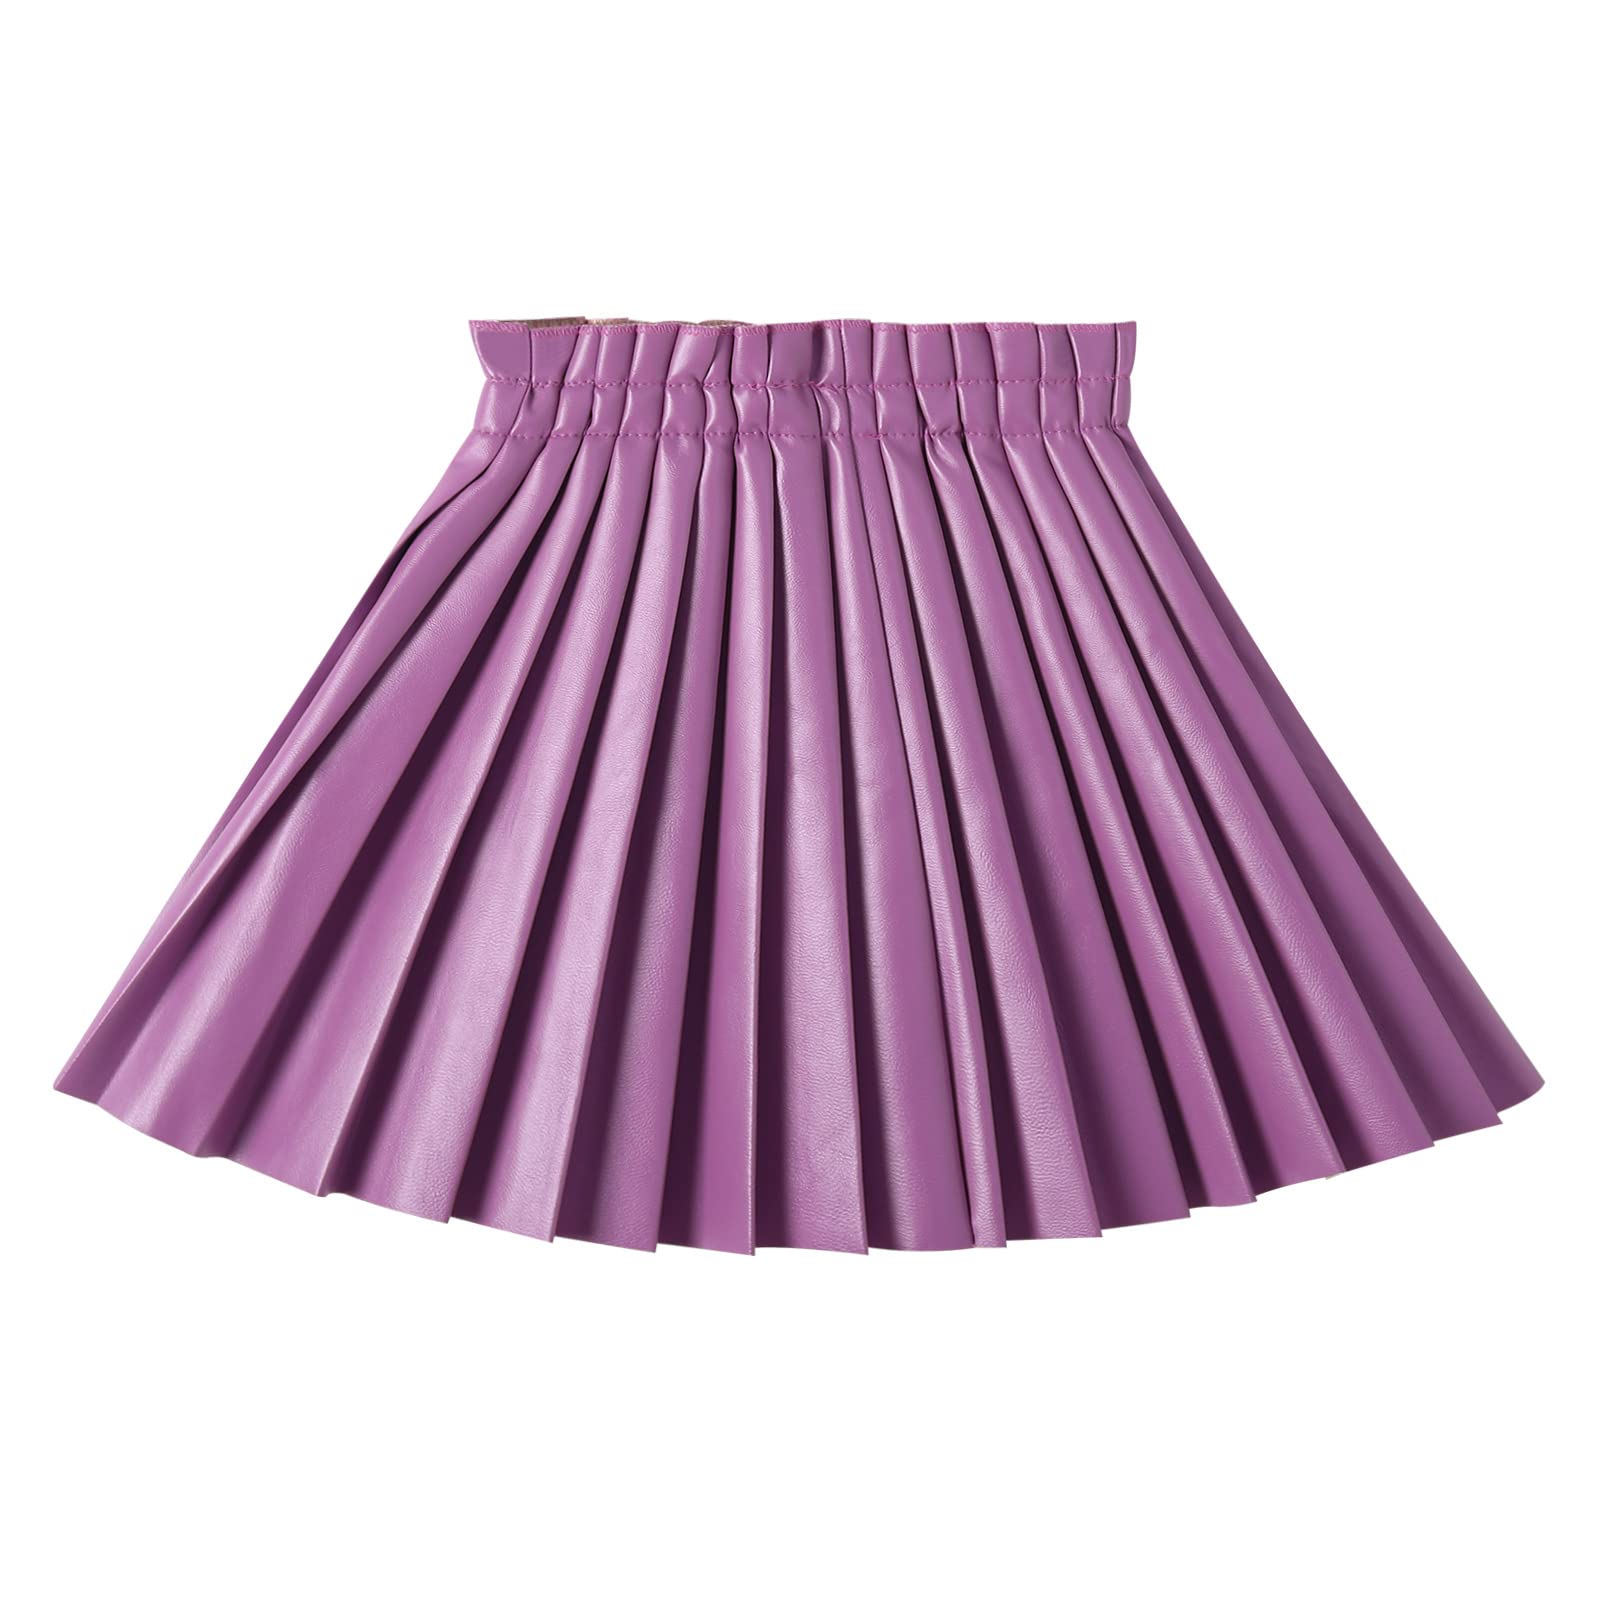 weLaken Pu Leather Skirts for girls Kids  Teen  Toddler  Women Faux Leather Pleated Skirts,Lilac,4T